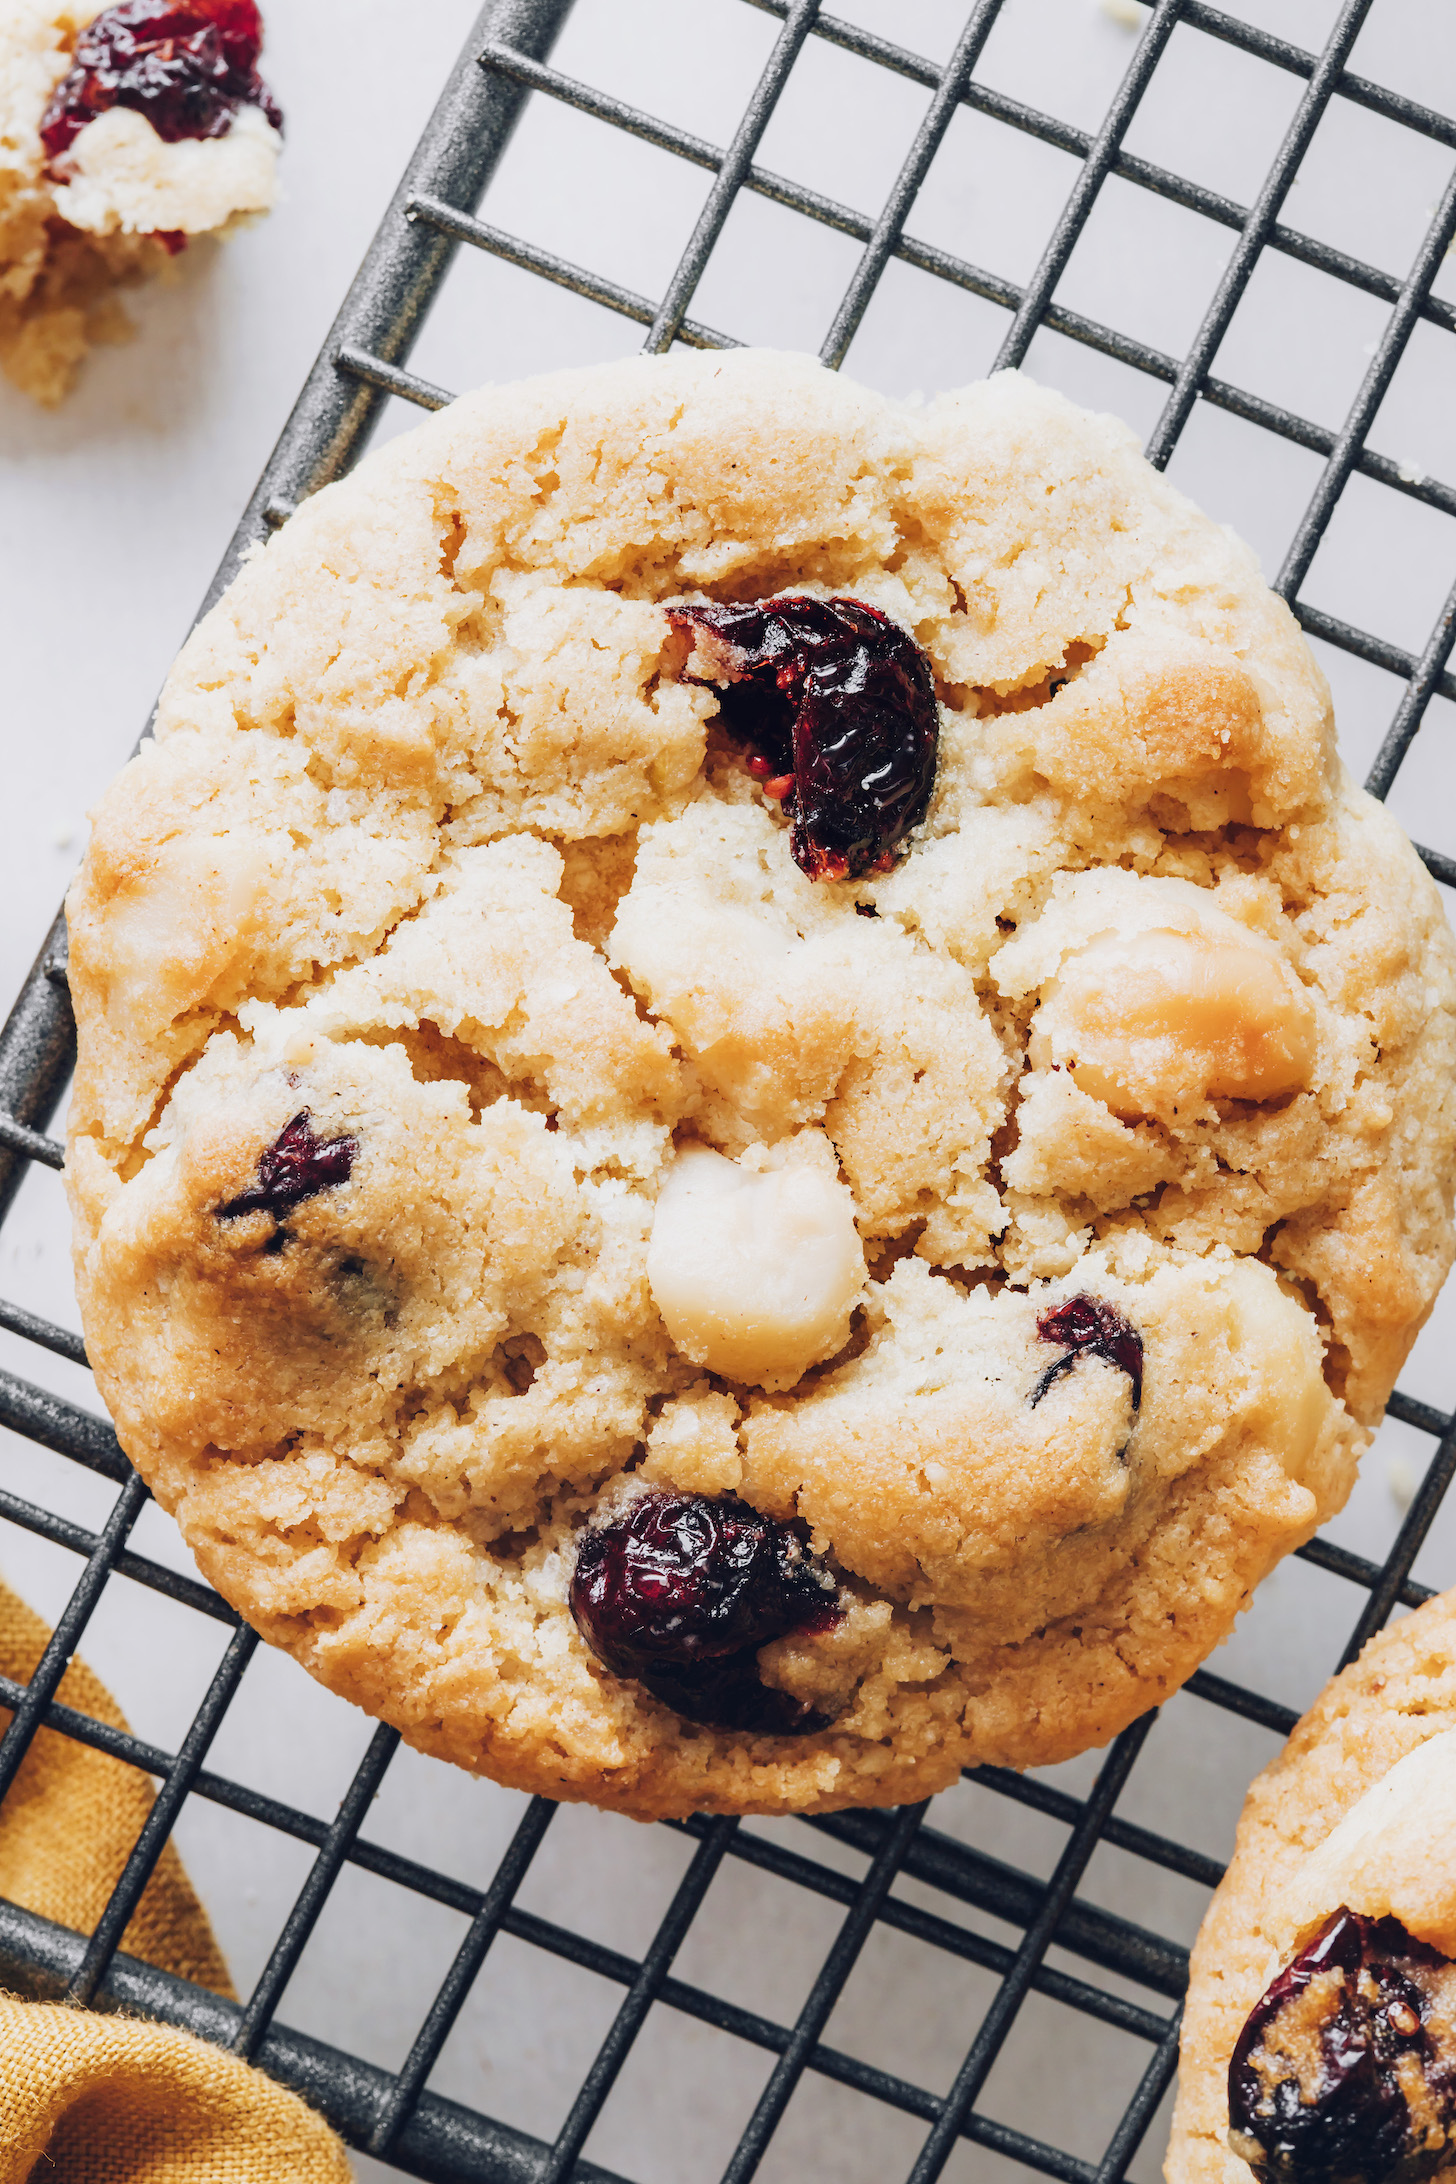 Soft gluten-free and vegan cookie studded with macadamia nuts and cranberries